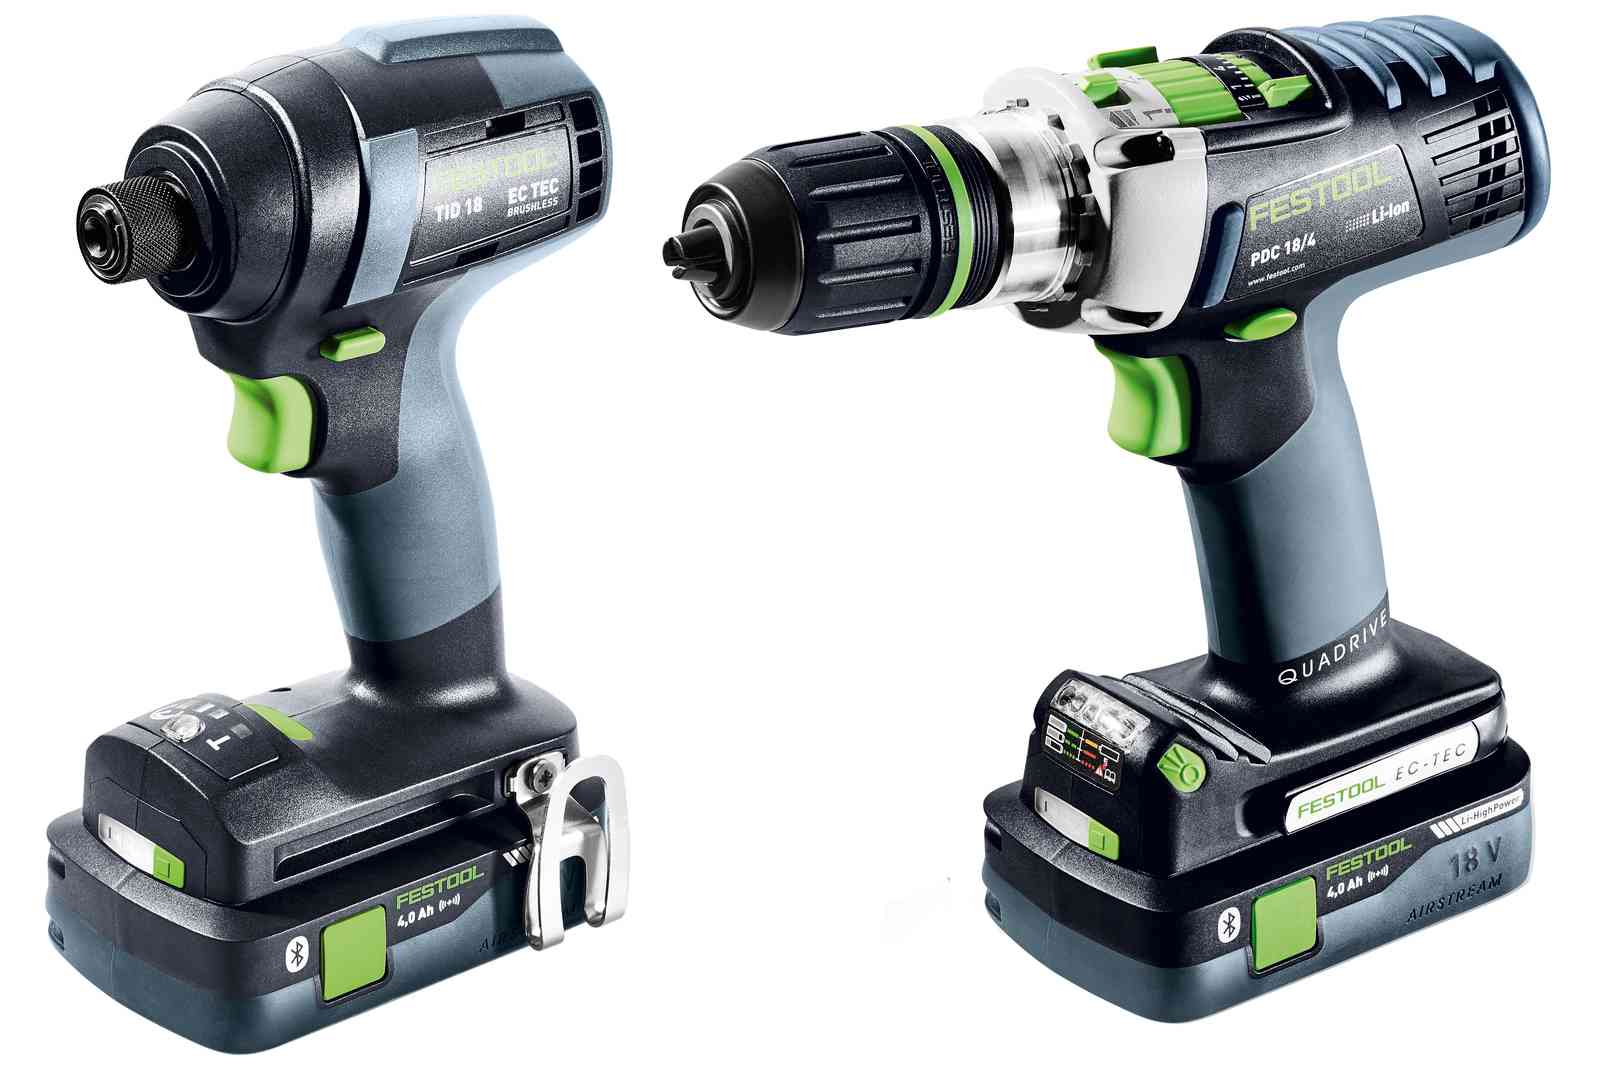 FES576490 TID18 Drill and Driver Cordless